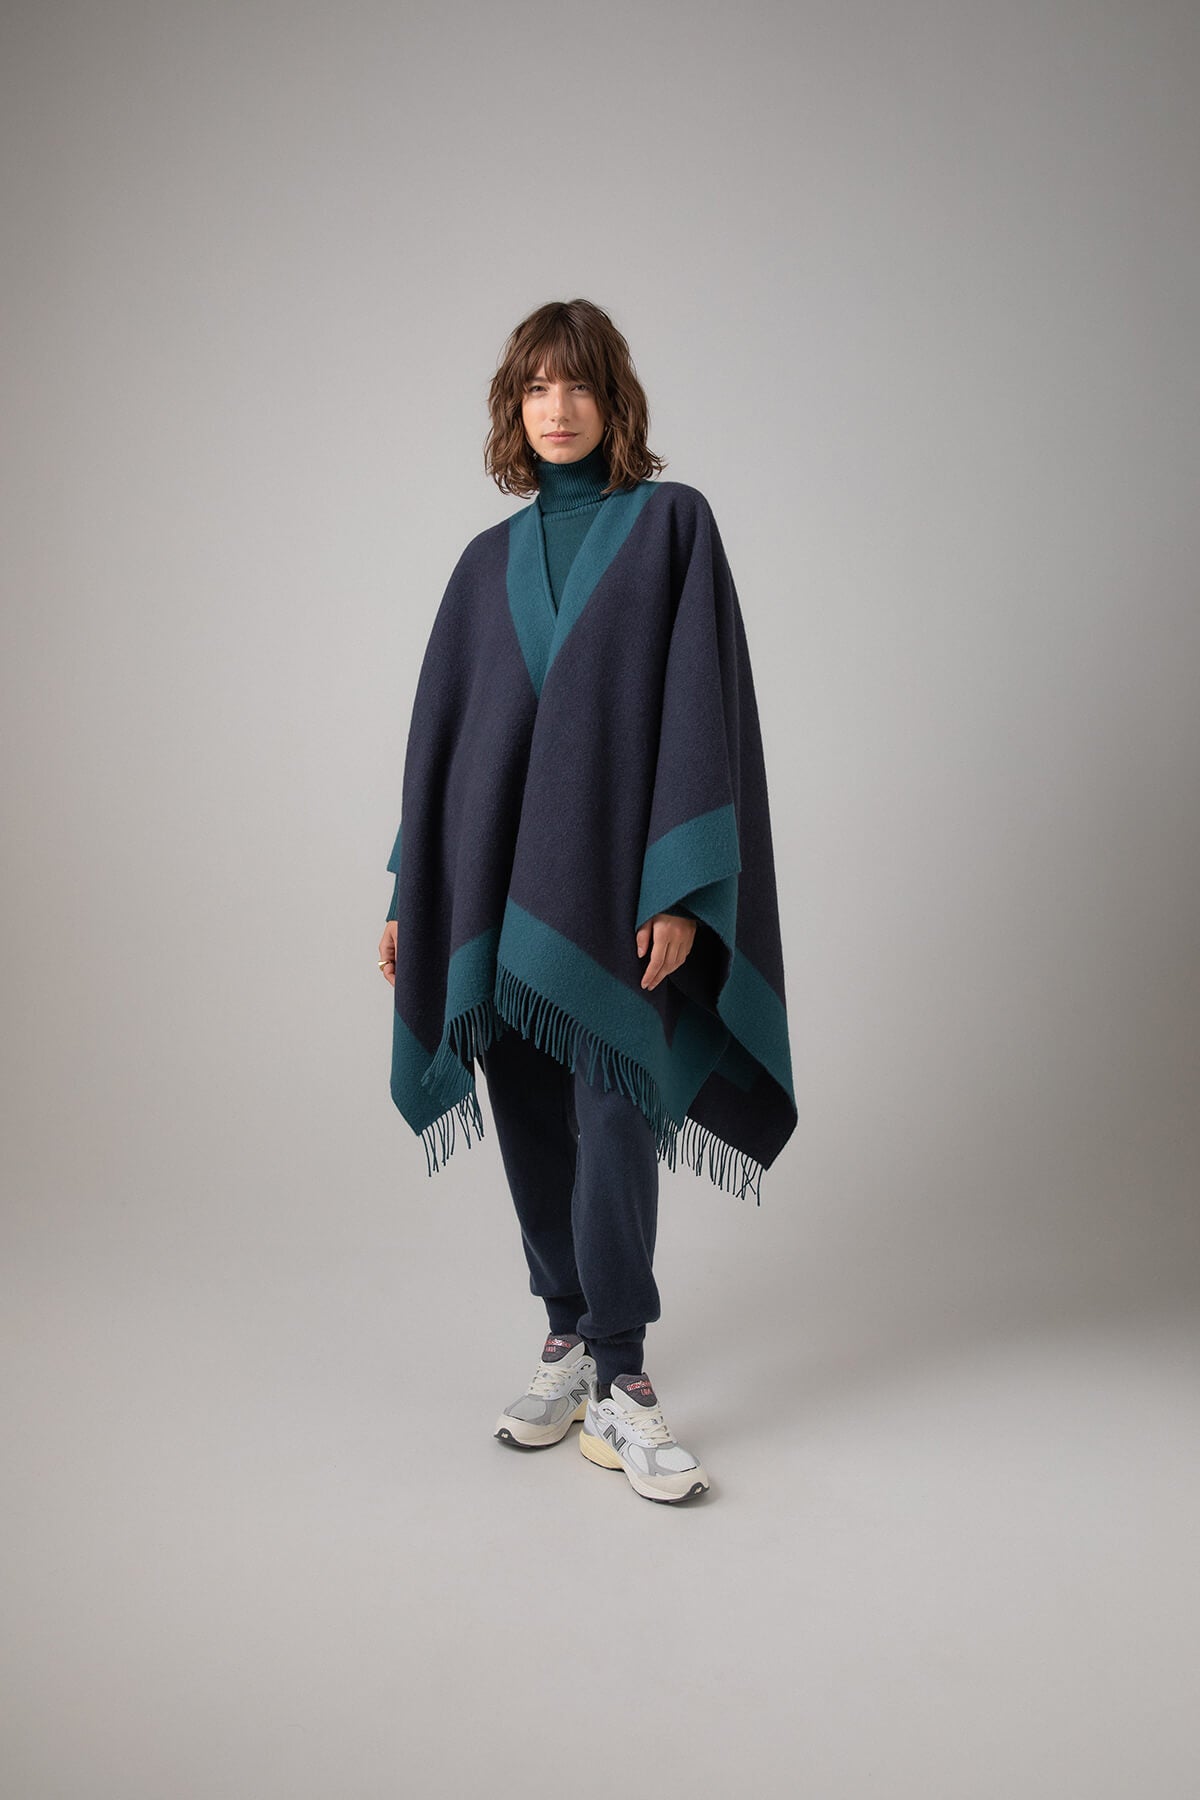 Johnstons of Elgin Merino Wool Cape with Contrast Border in Mallard worn matching sweater and Mazarine Joggers on a grey background TD000230RU7358ONE